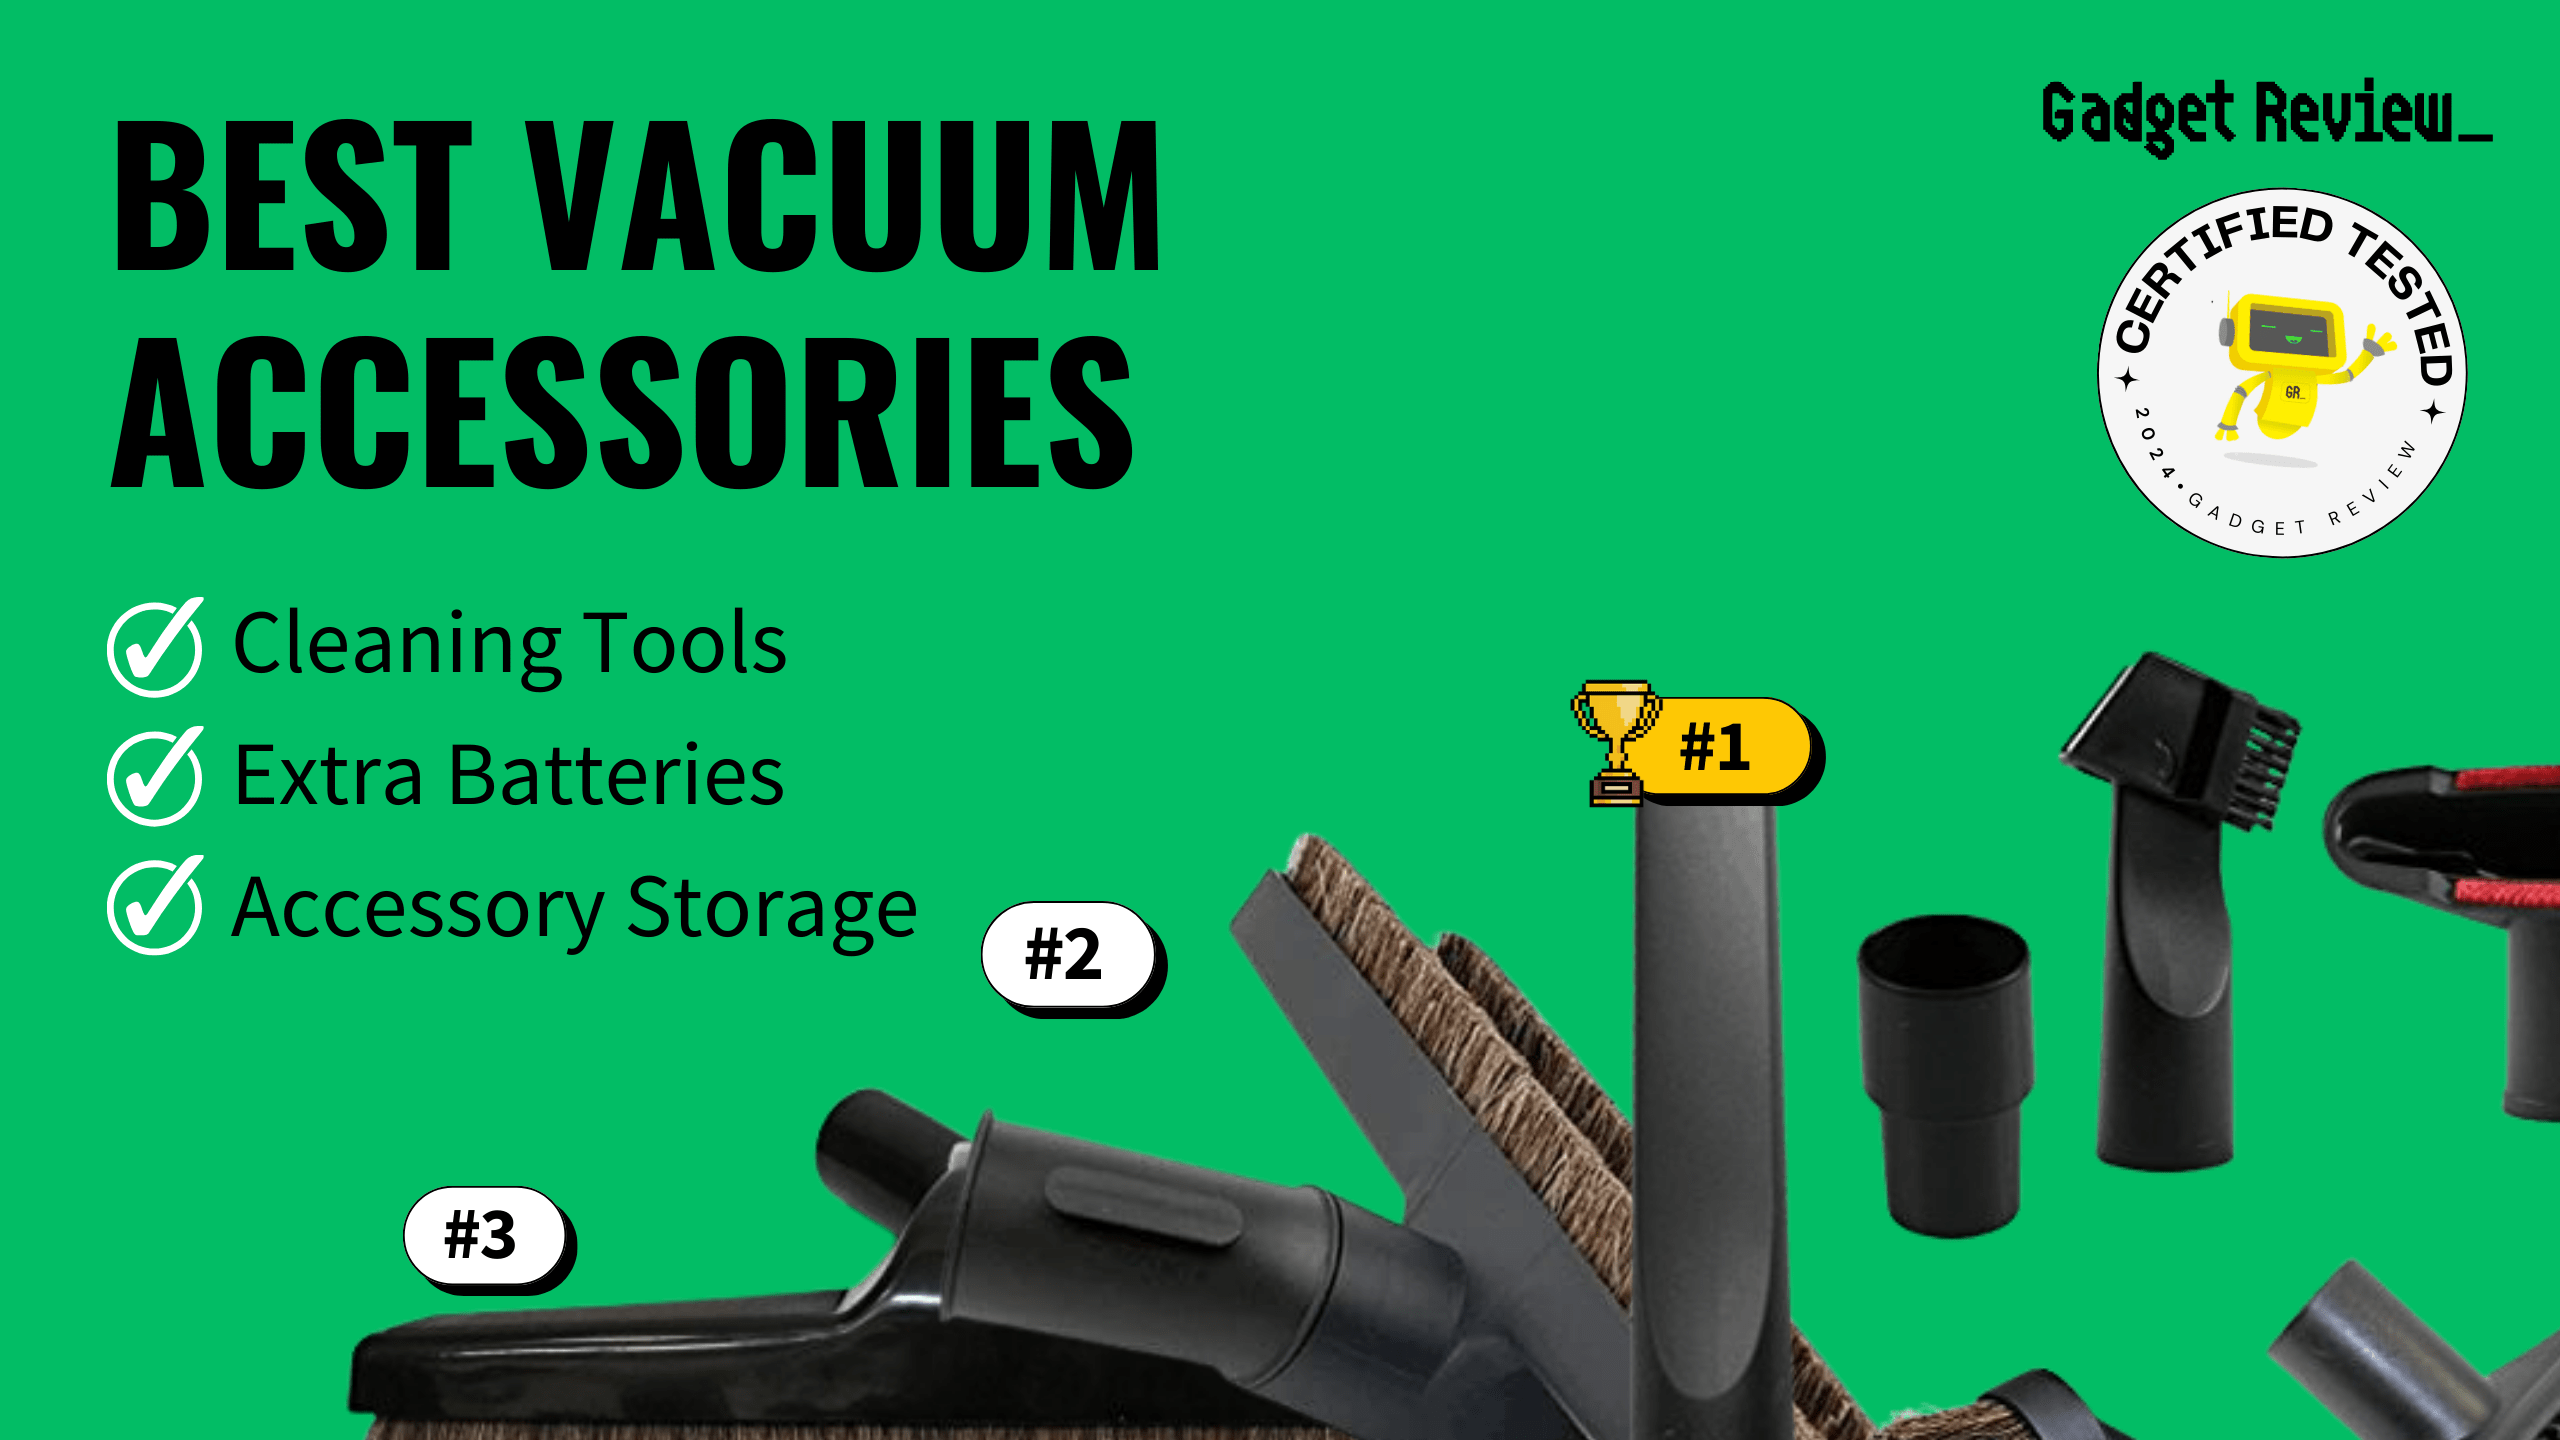 best vacuum accessories guide that shows the top best vacuum cleaner model